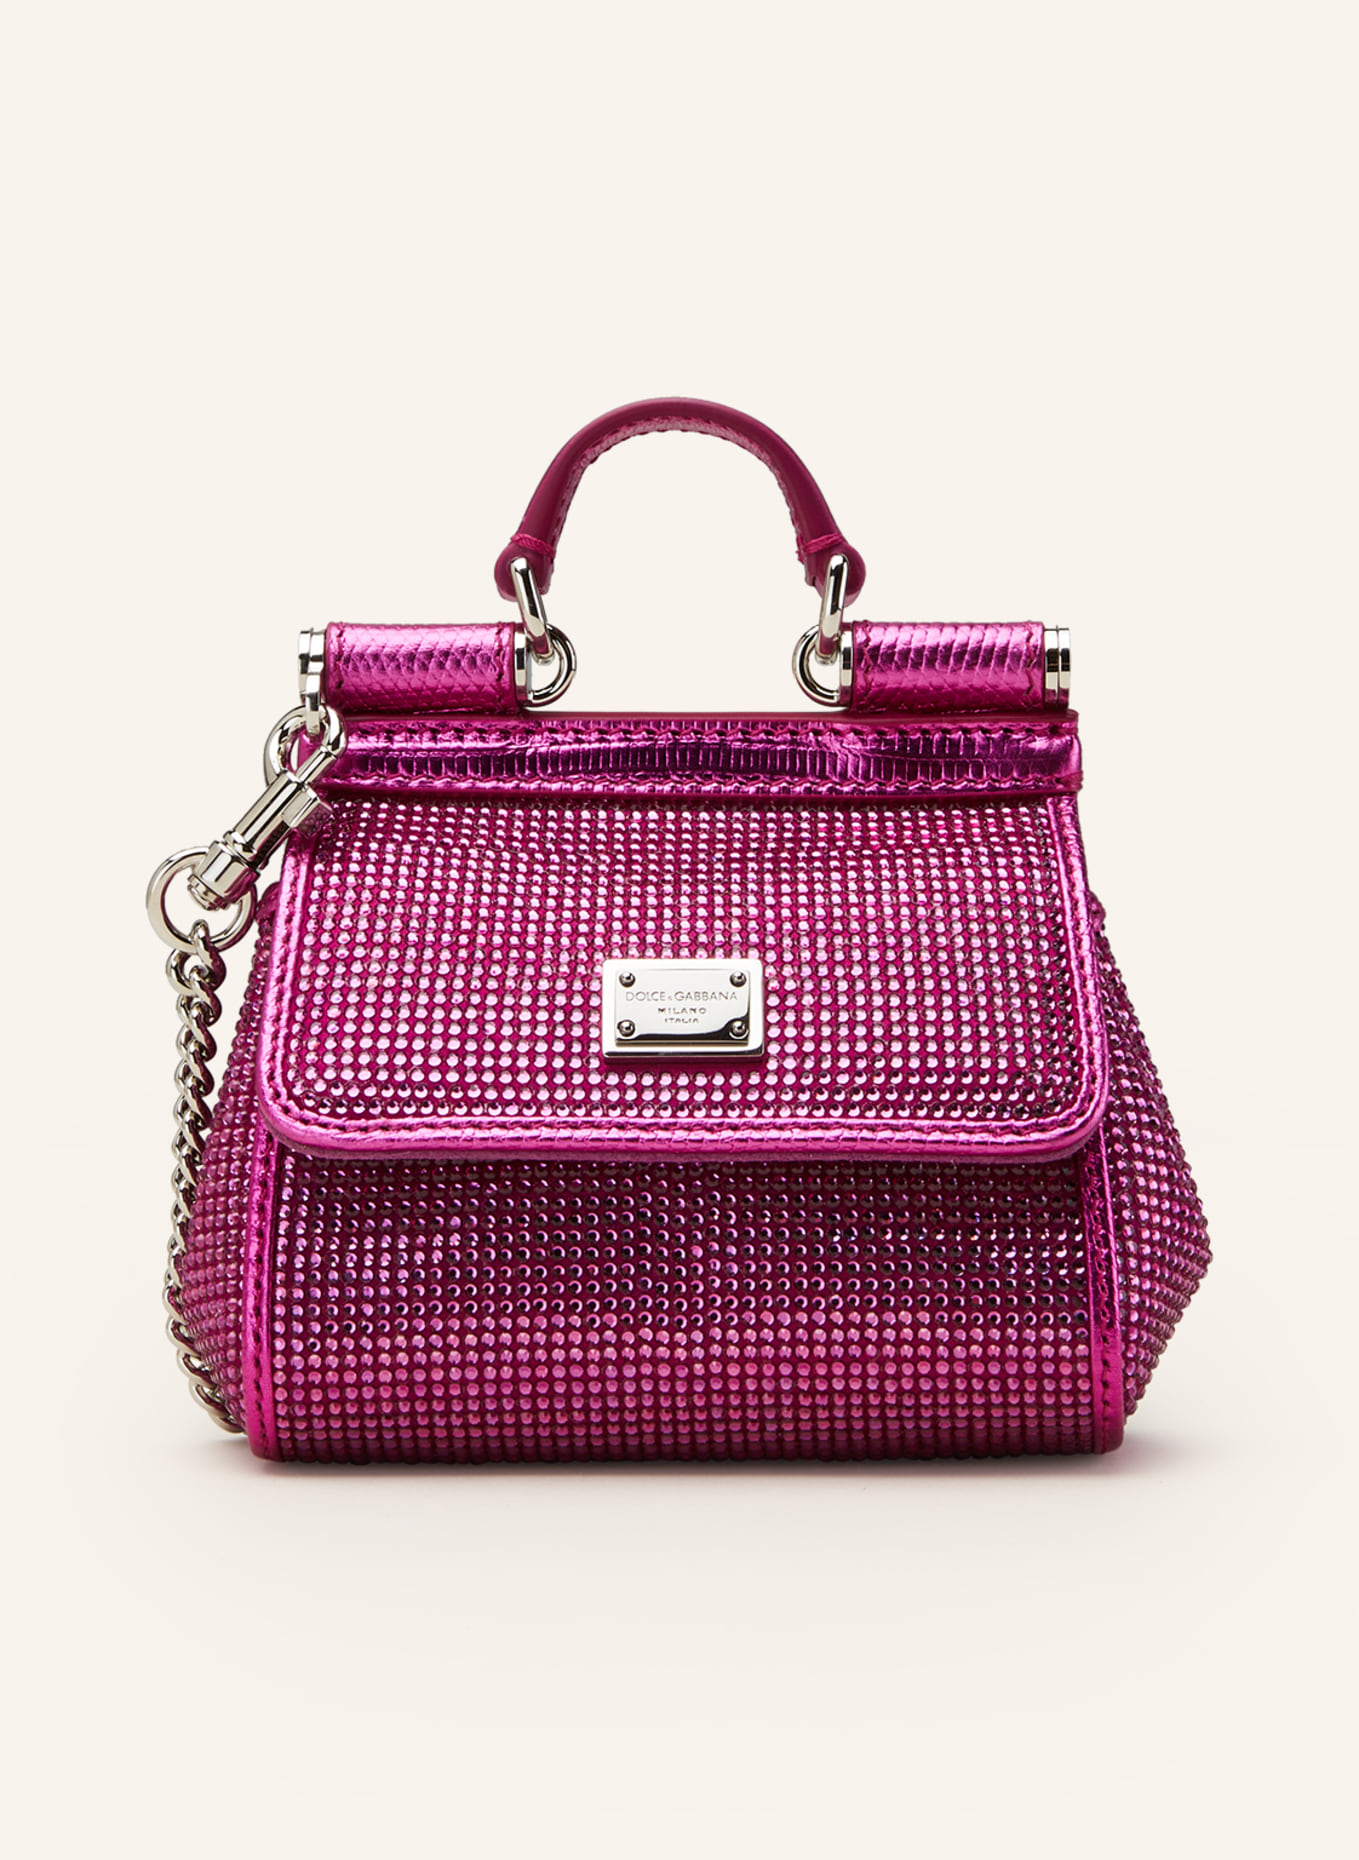 Dolce & Gabbana Fuchsia Leather Small Miss Sicily Top Handle Bag